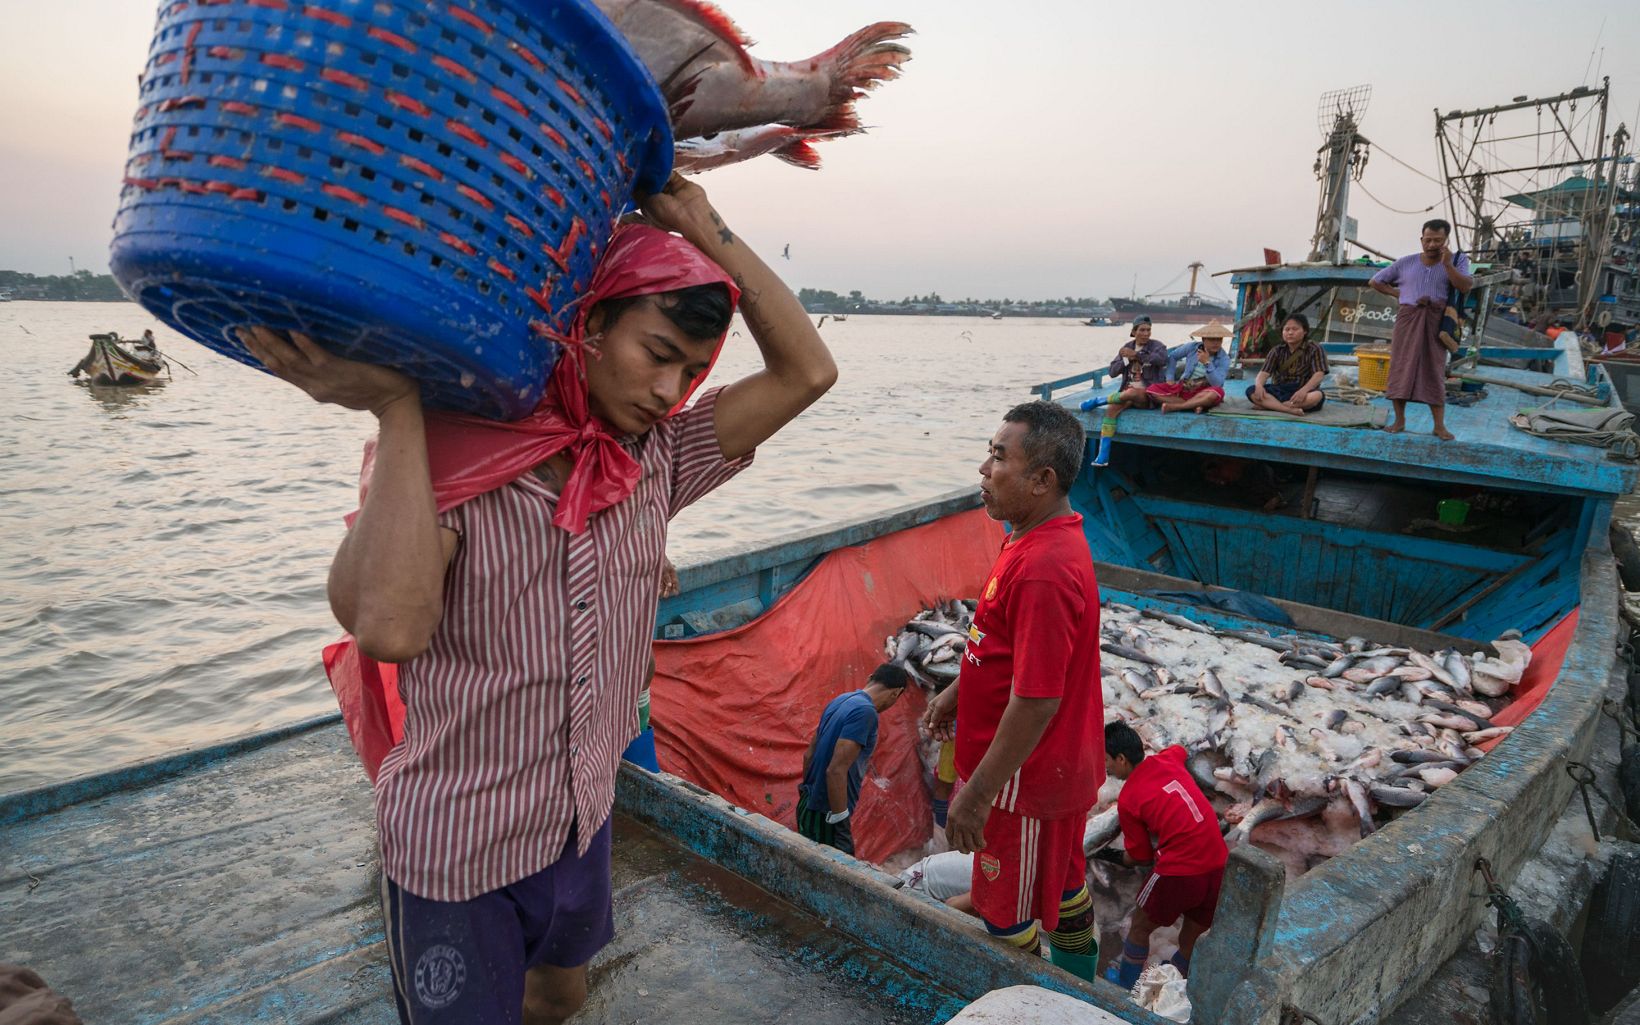 A person hoists a basket of fish from a fishing boat while others look on.